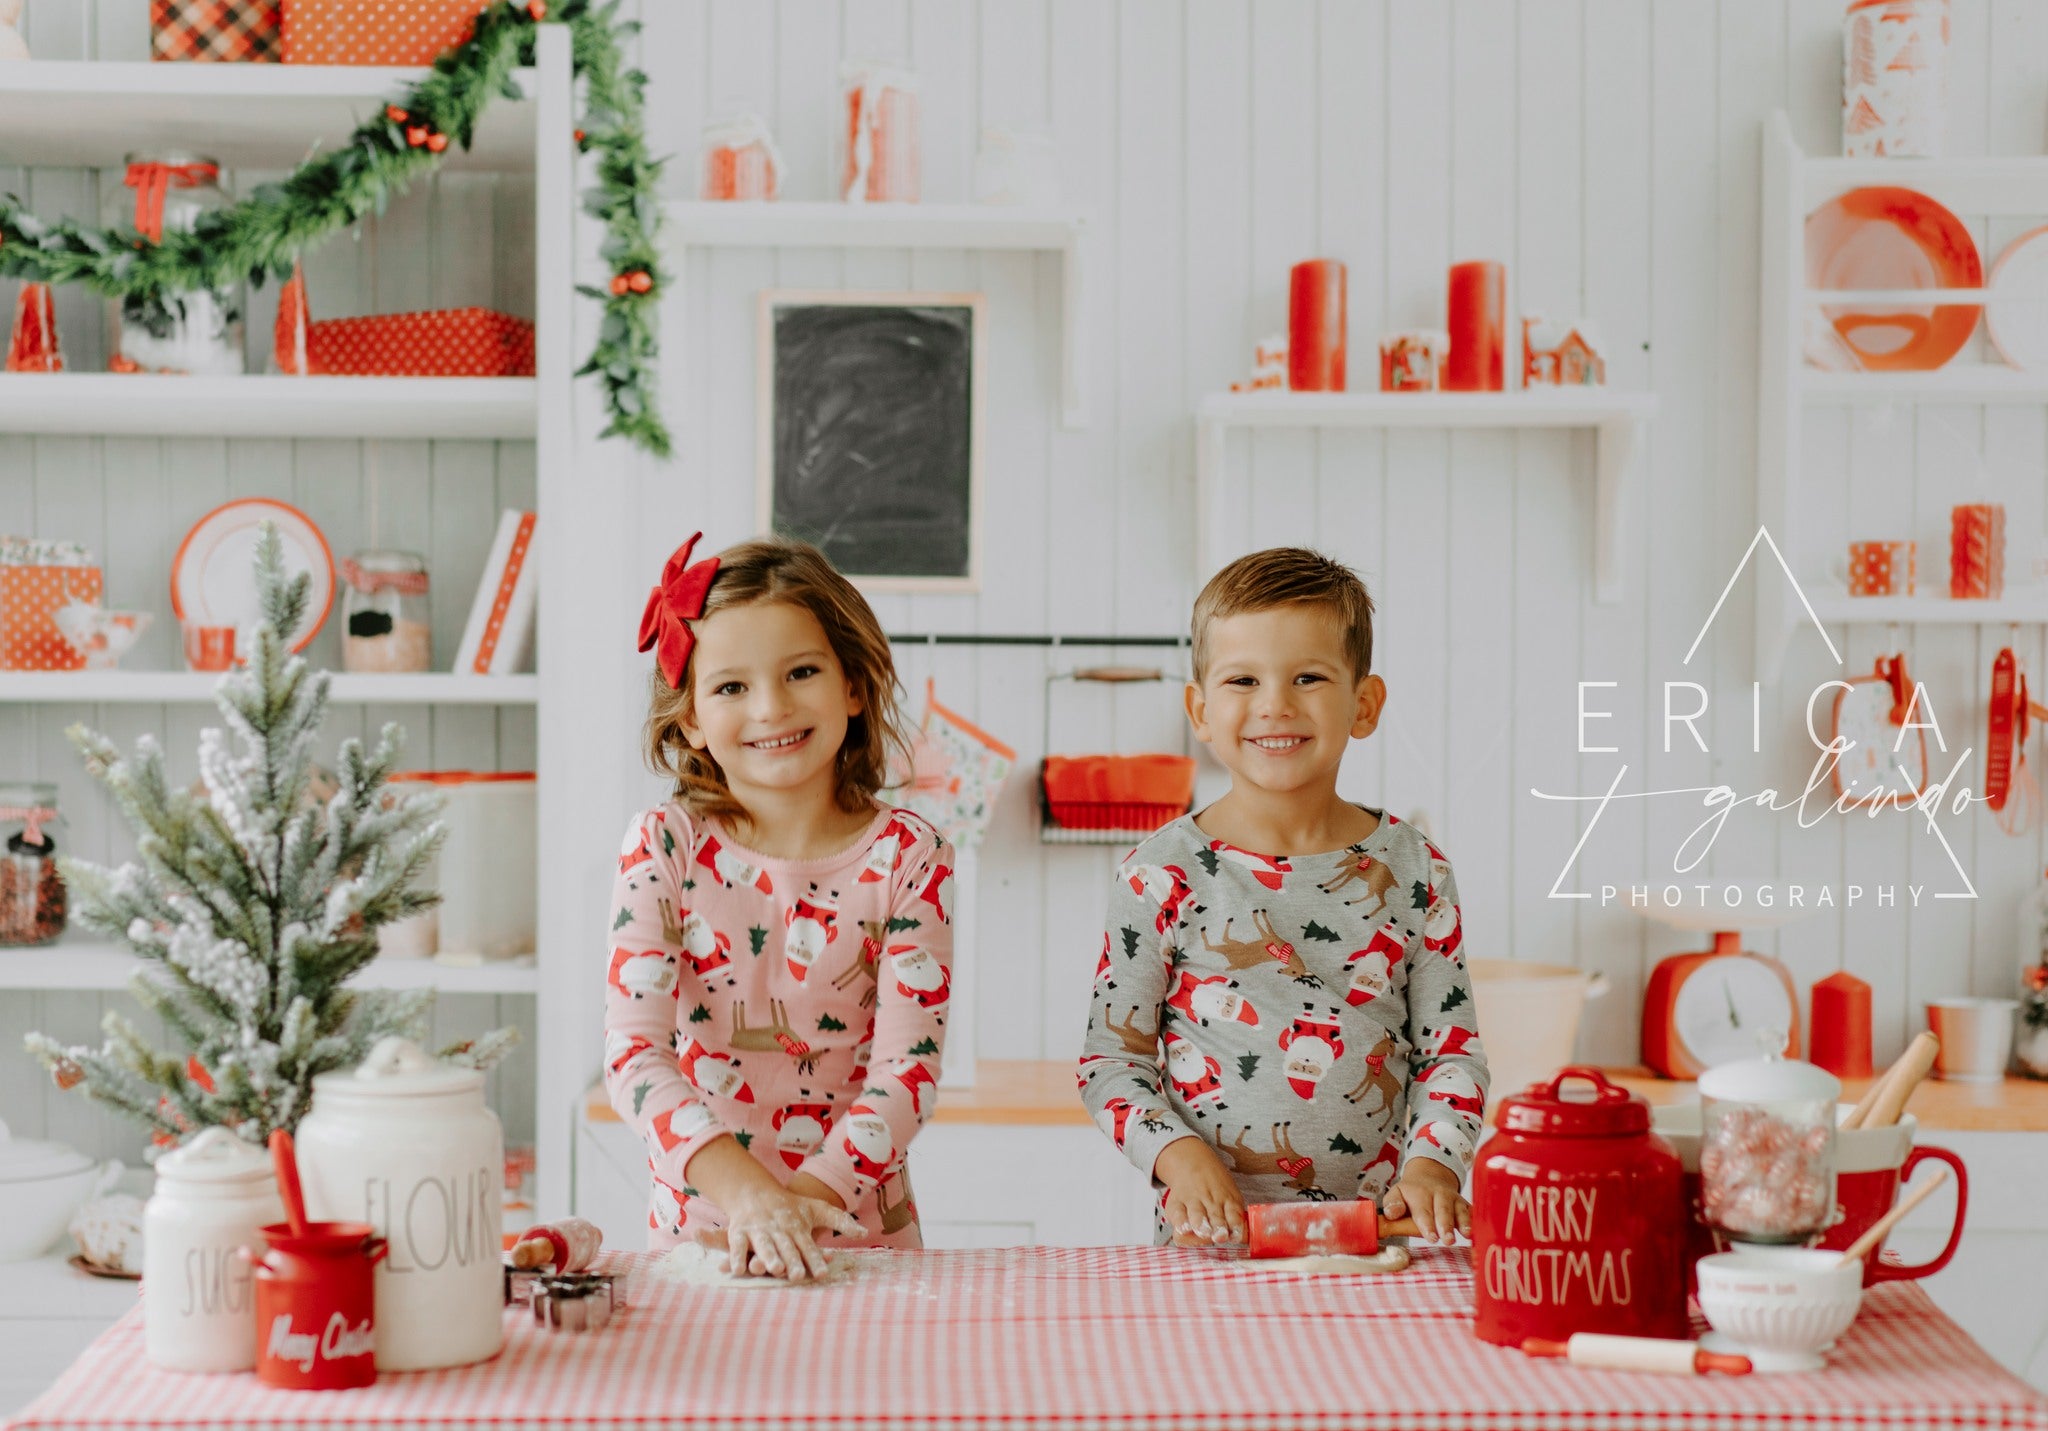 Kate Christmas Kitchen Backdrop White Wall for Photography